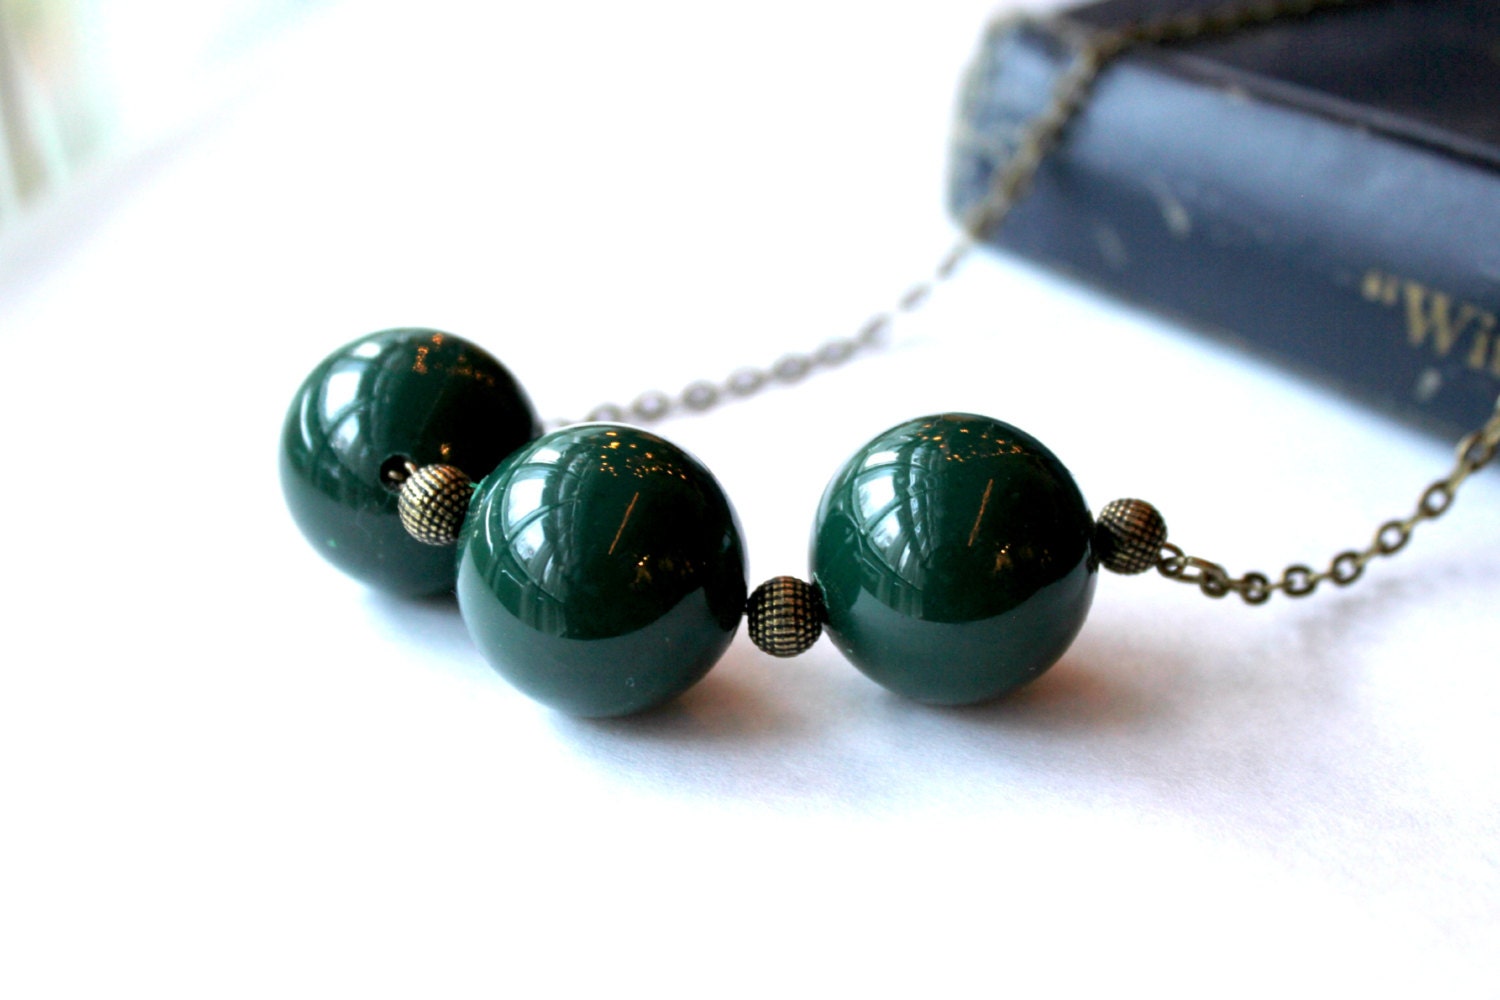 Emerald Green Vintage Bead Necklace, Dark Green Beads with Antique Bronze Accents, Chain, Under 25 - raelwear